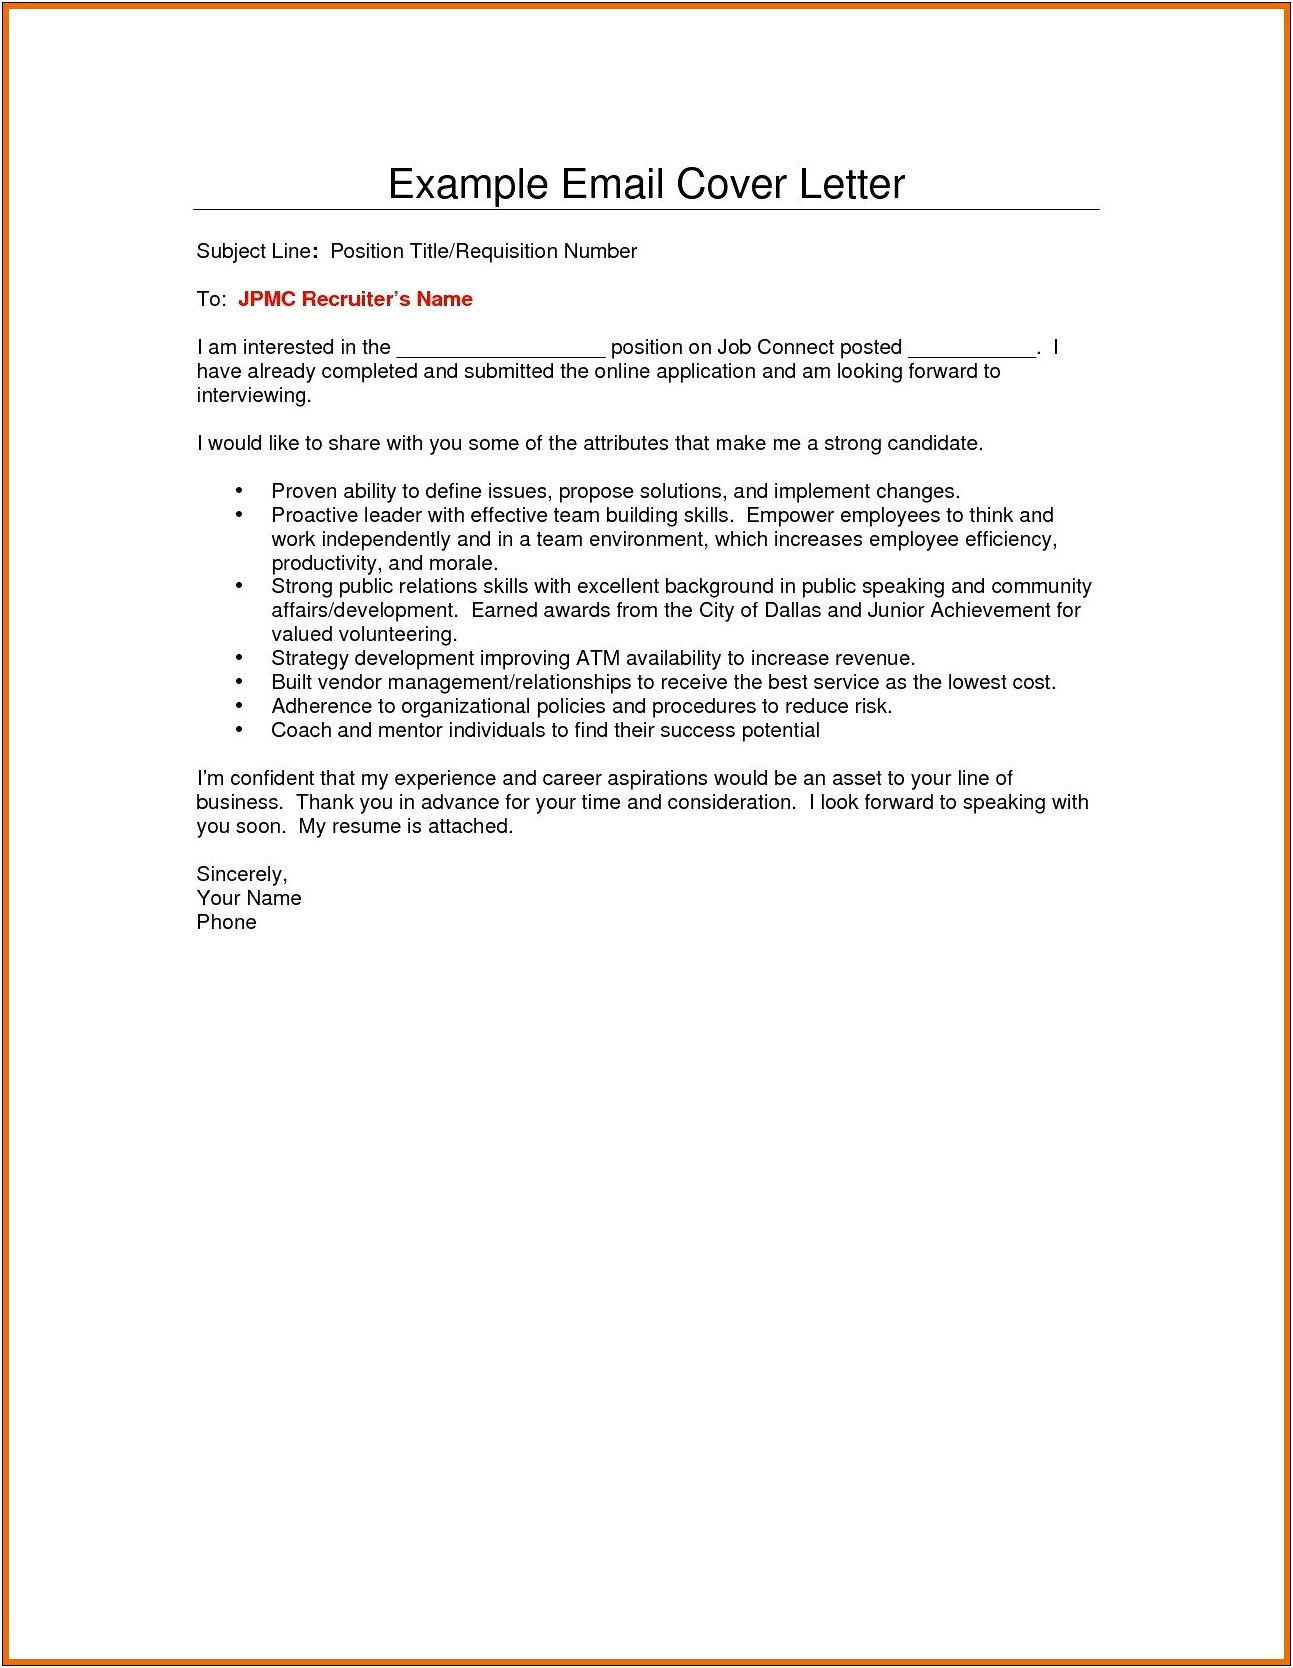 Email Resume Cover Letter Subject Line